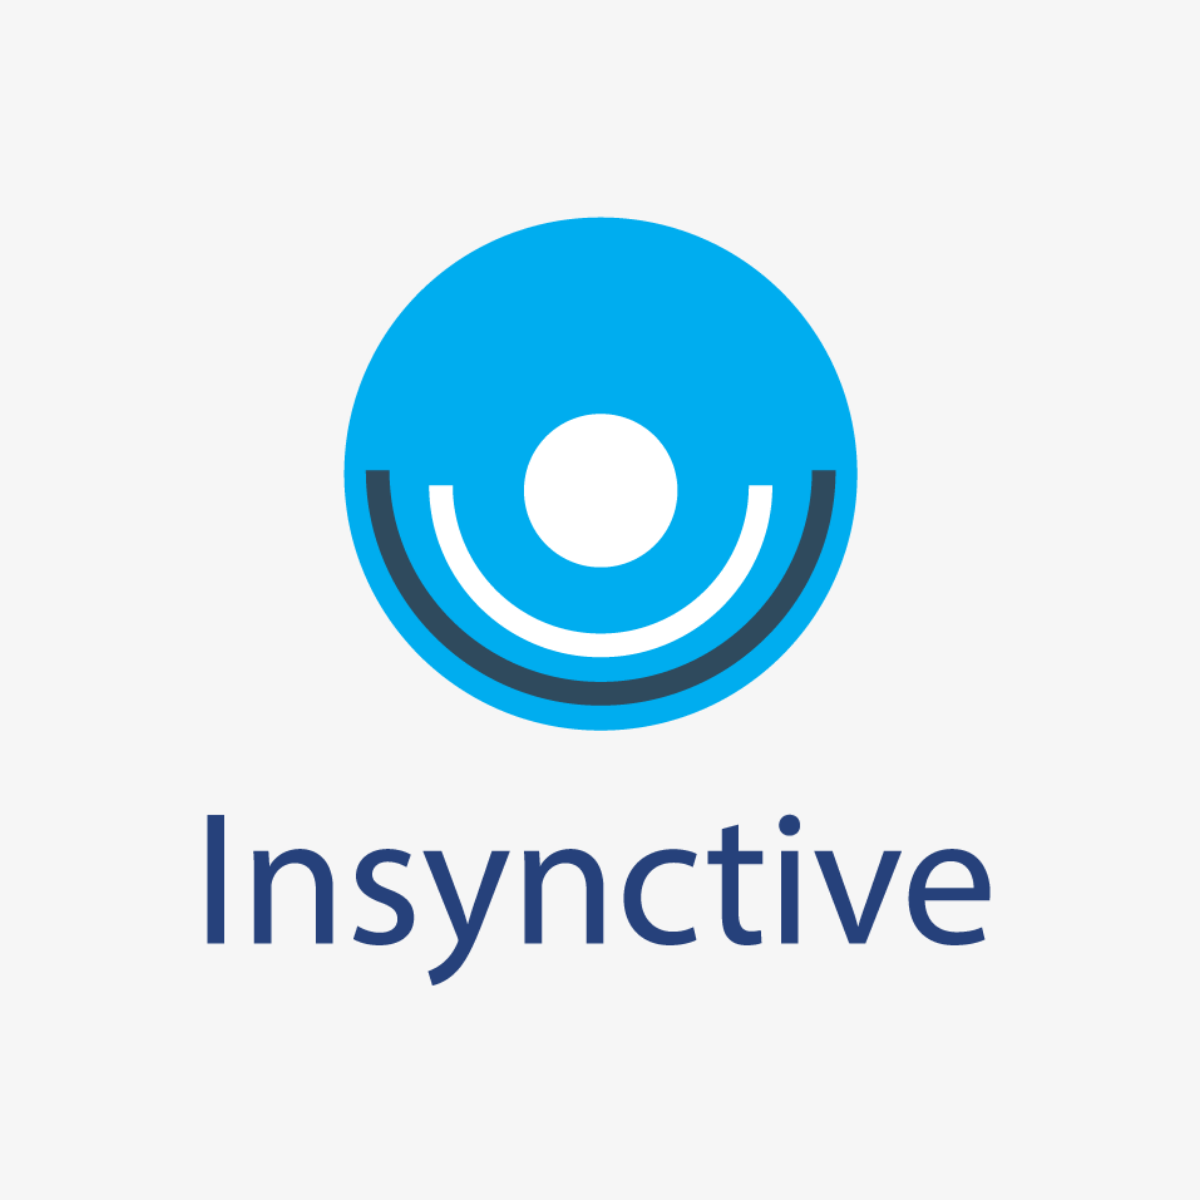 Insynctive